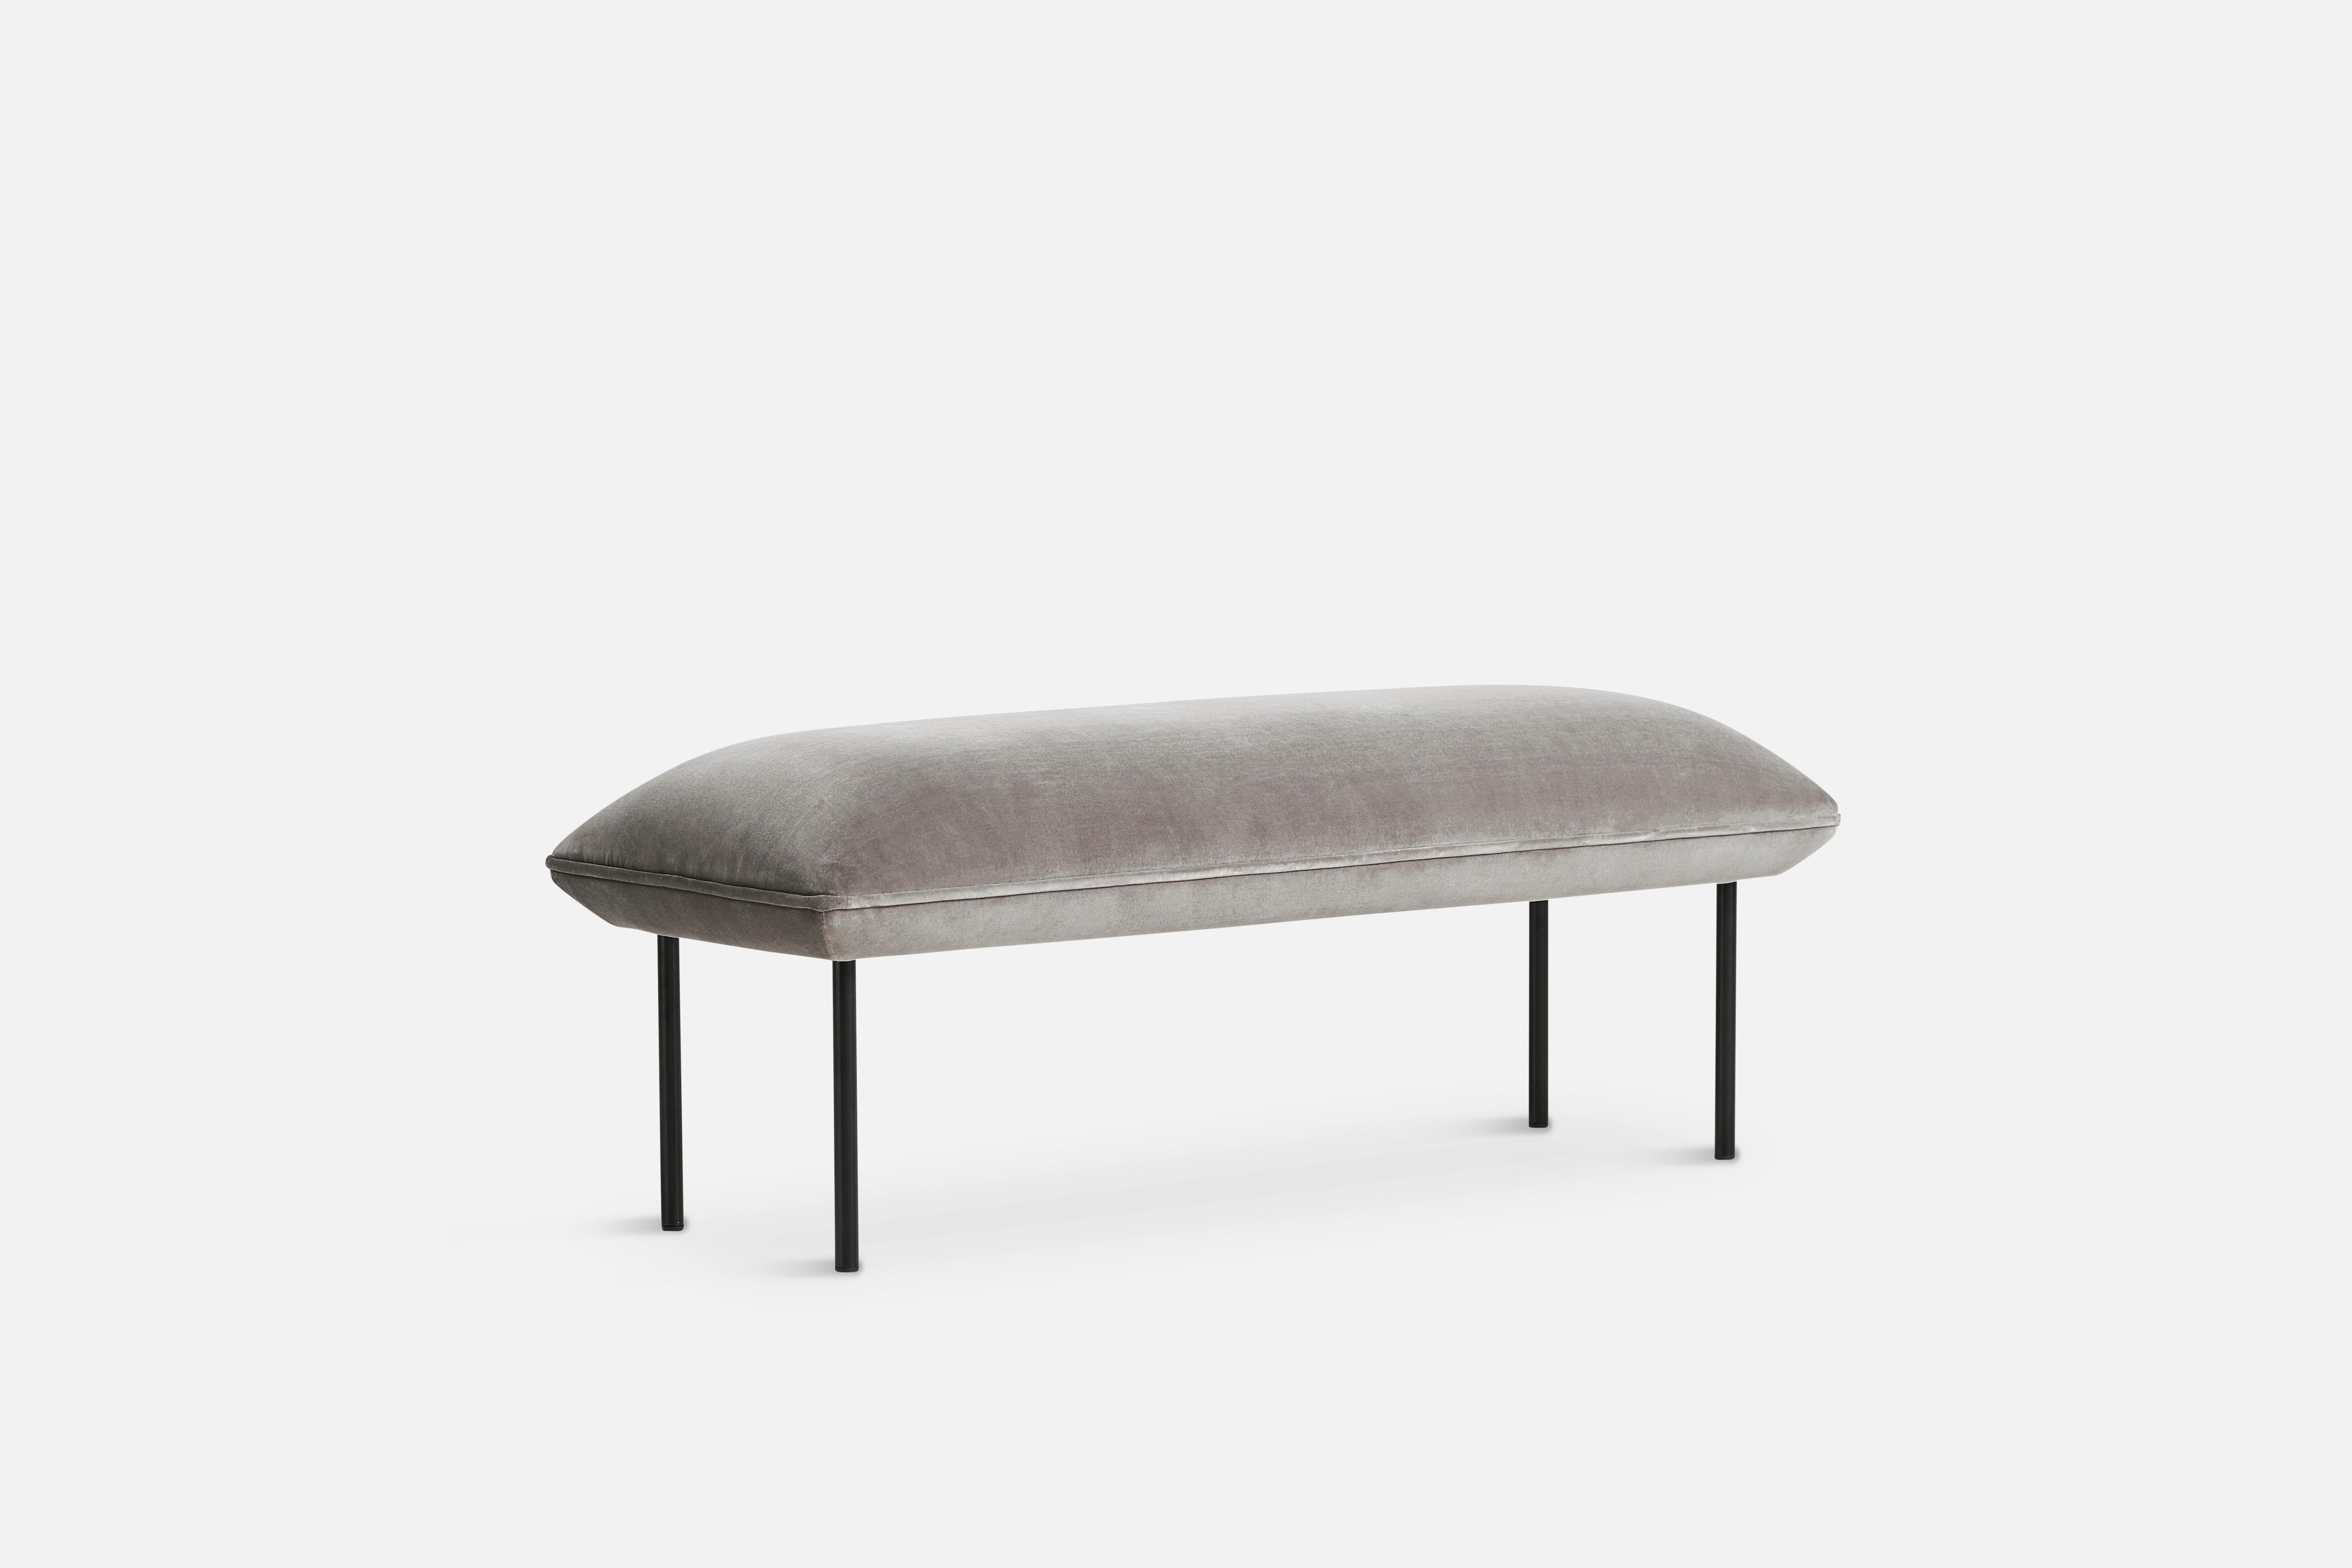 Nakki bench by Mika Tolvanen.
Materials: Foam, Plywood, Elastic Belts, fabric (Harald 3, 0143).
Dimensions: D 45 x W 120 x H 46 cm.
Also available in different colours and materials. 

The founders, Mia and Torben Koed, decided to put their 30